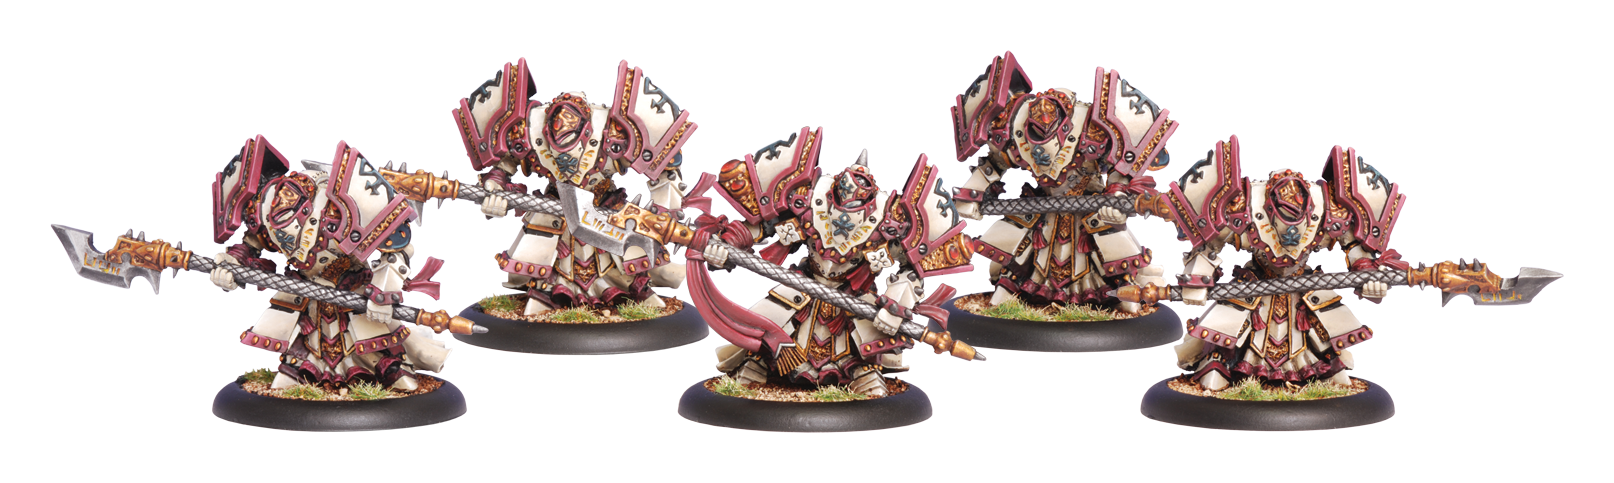 Warmachine Protectorate Of Menoth Exemplar Bastions - Pastime Sports & Games